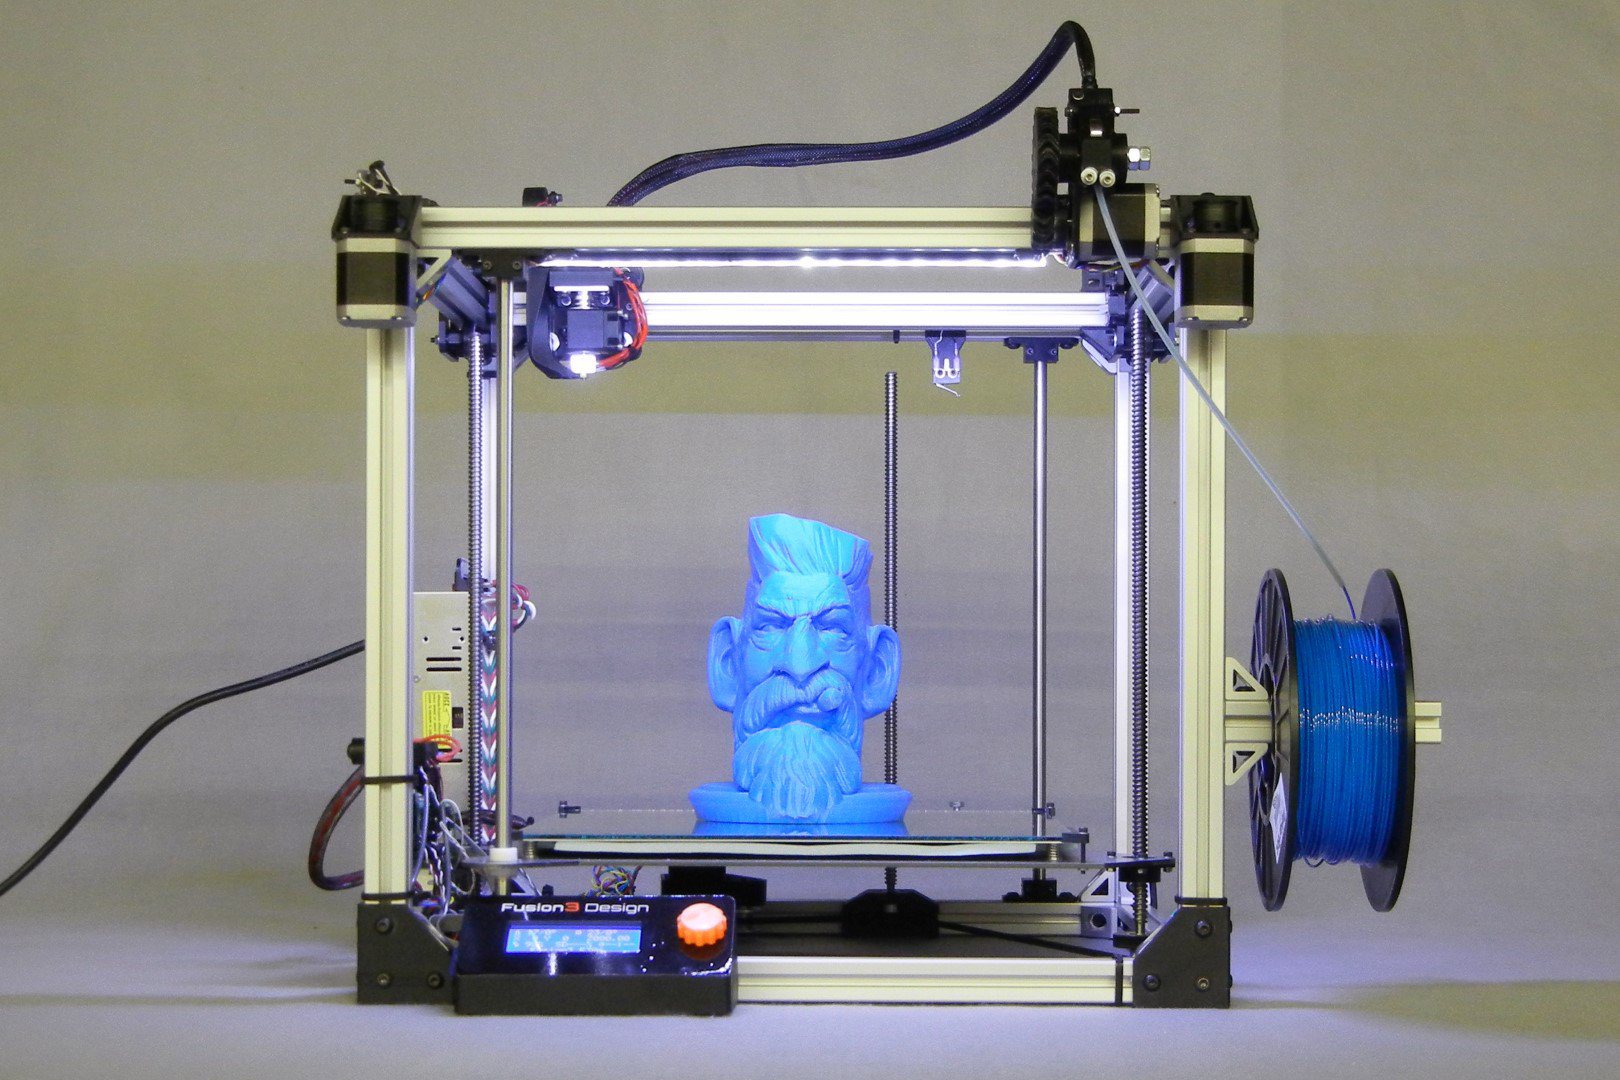 Elon Technology Blog / Making the Maker Hub: more 3d printers - Xfrontlow Large.jpg.pagespeeD.ic .OBC33auH1K1